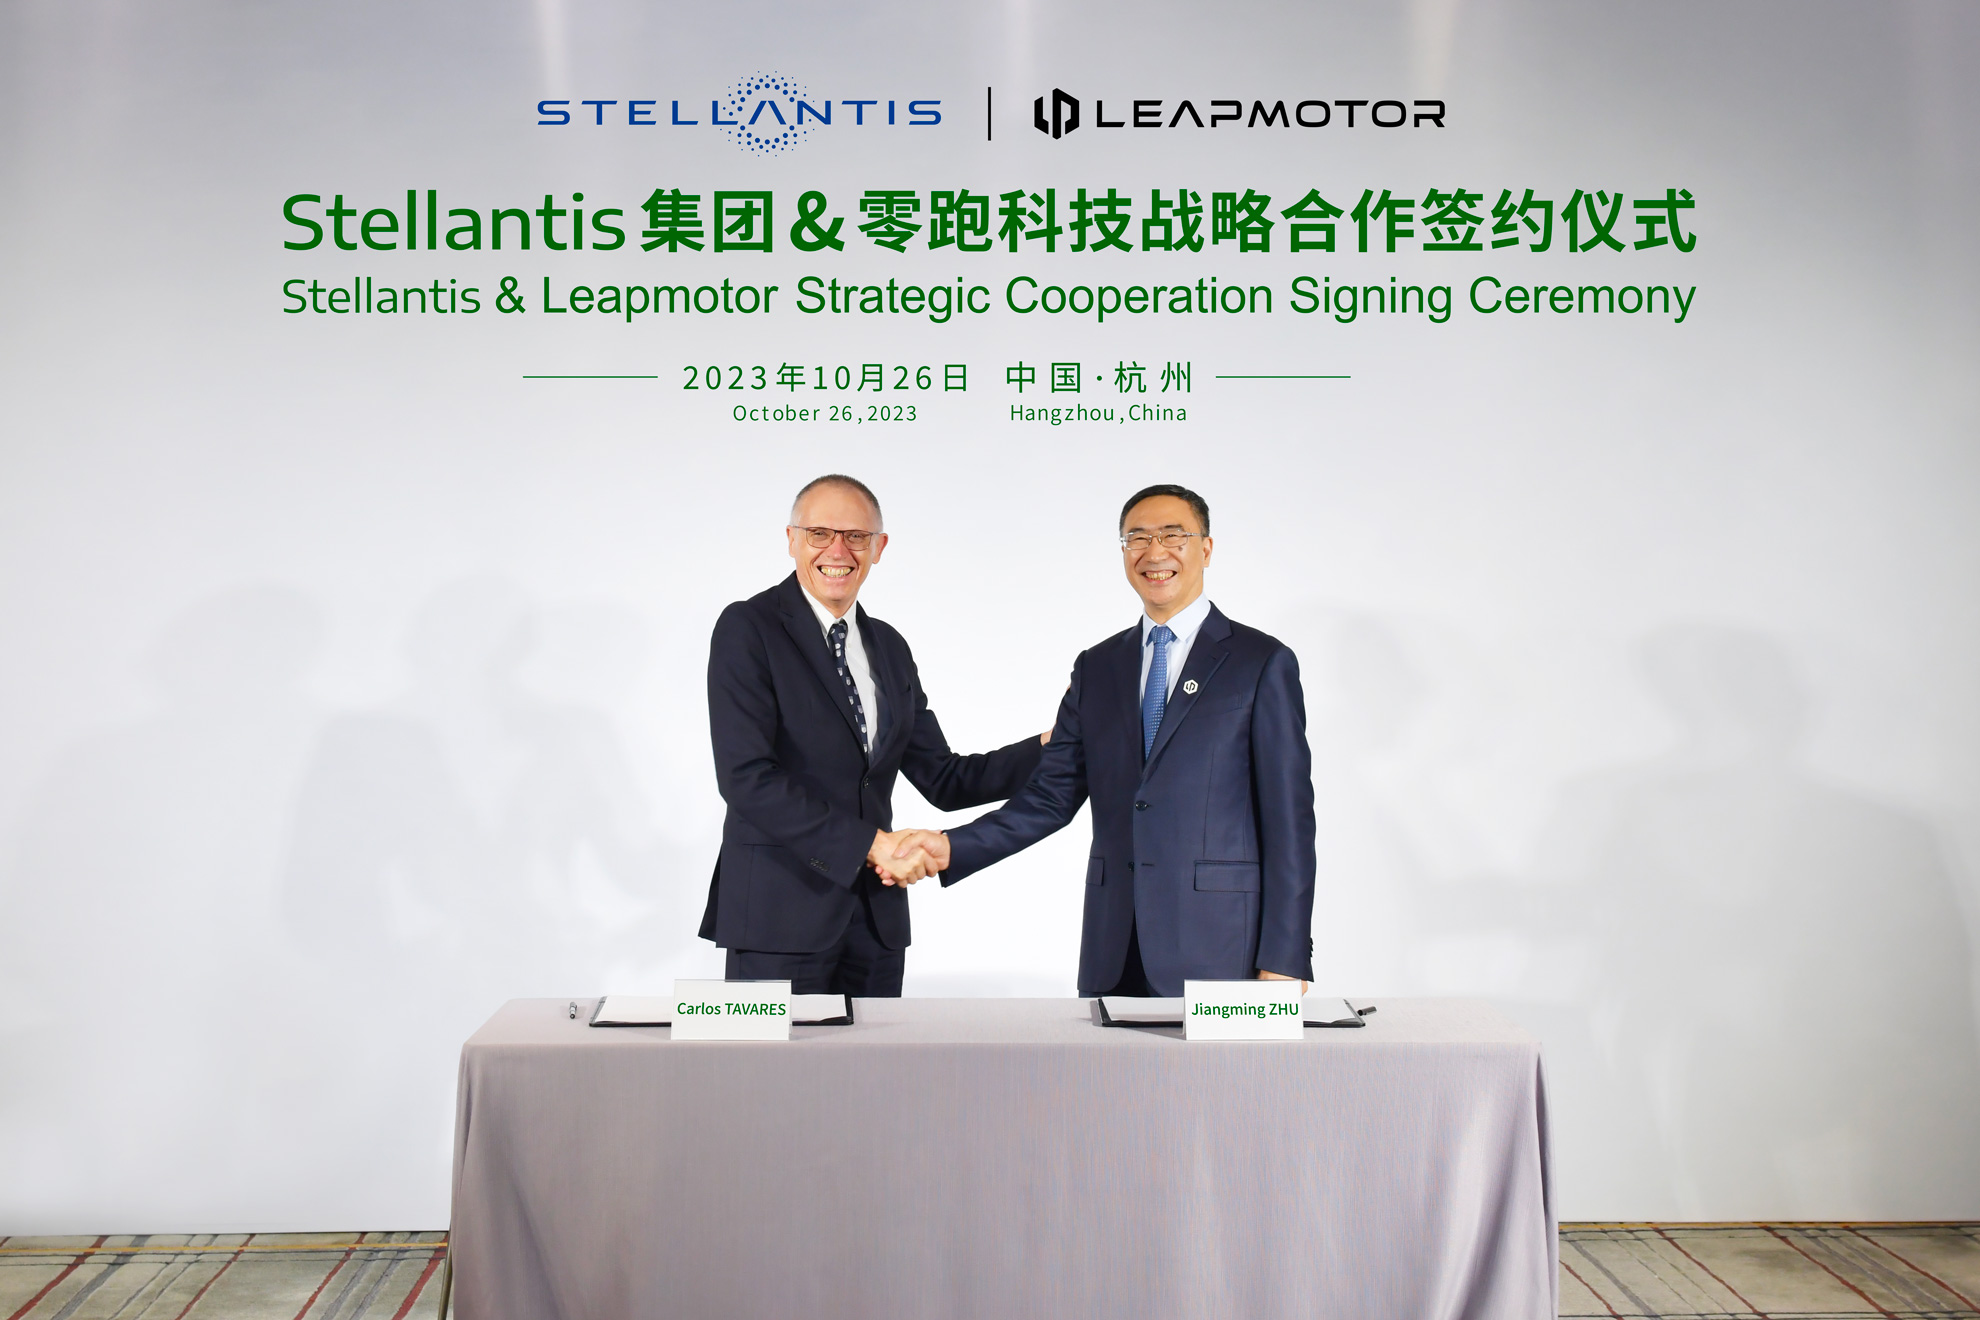 Stellantis invests €1.5B in Leapmotor for EV growth